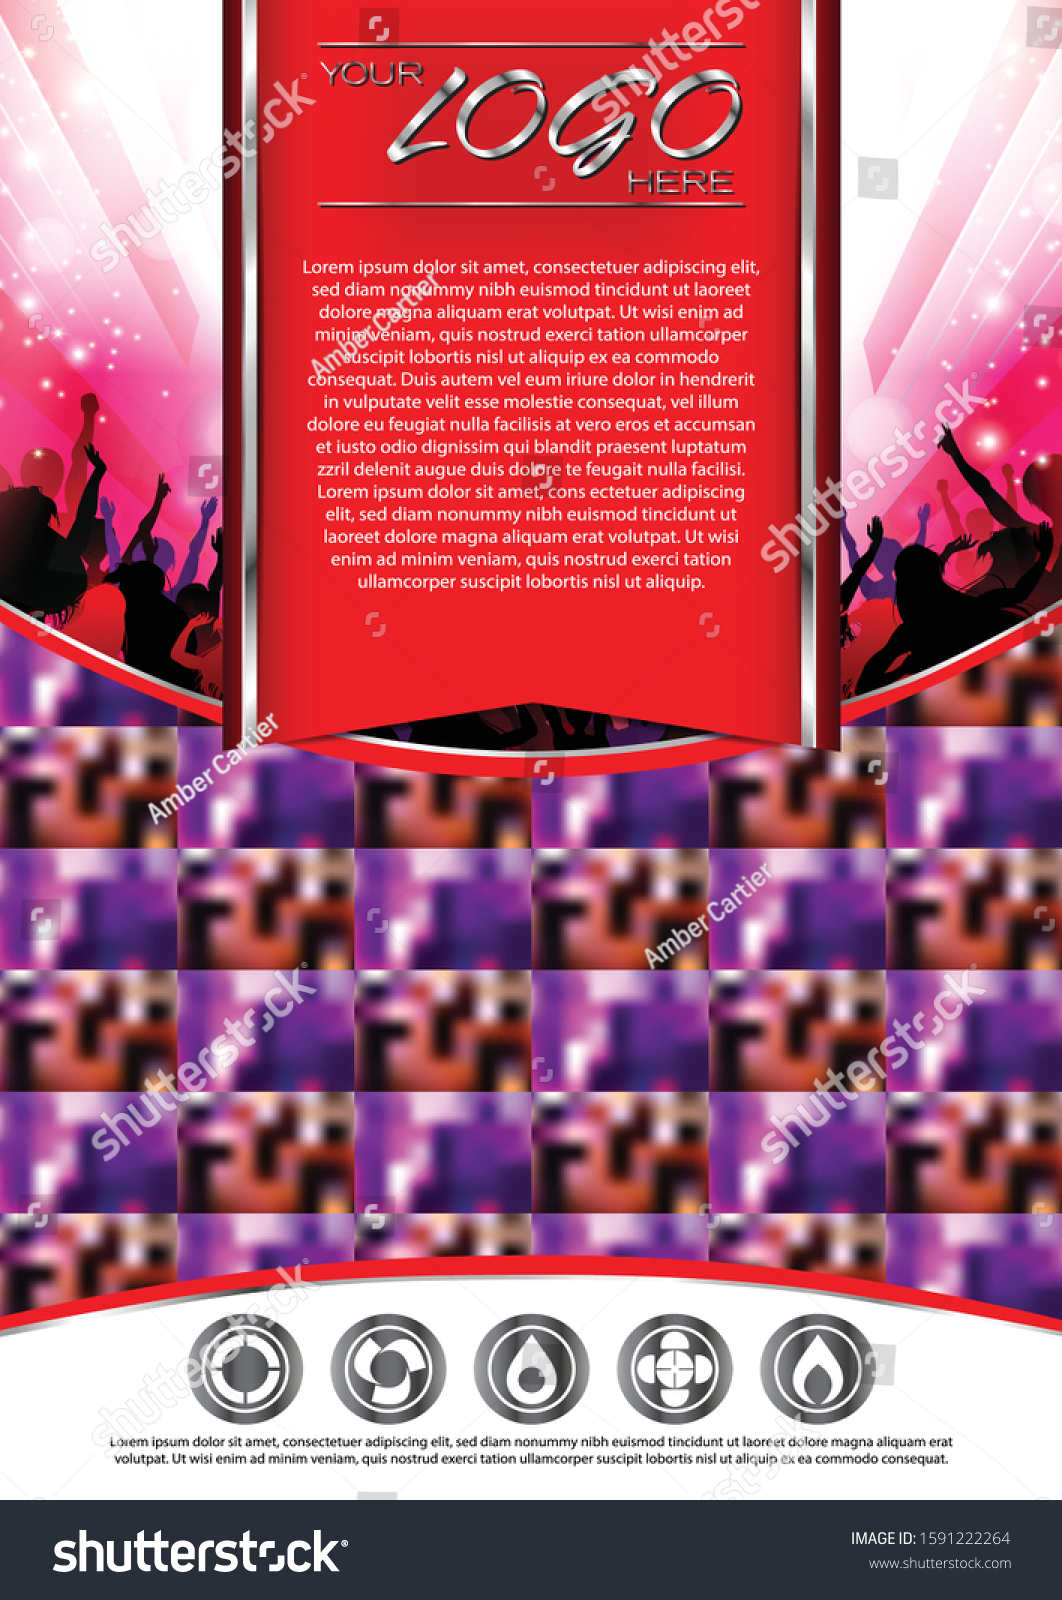 Event Ad Template from image.shutterstock.com